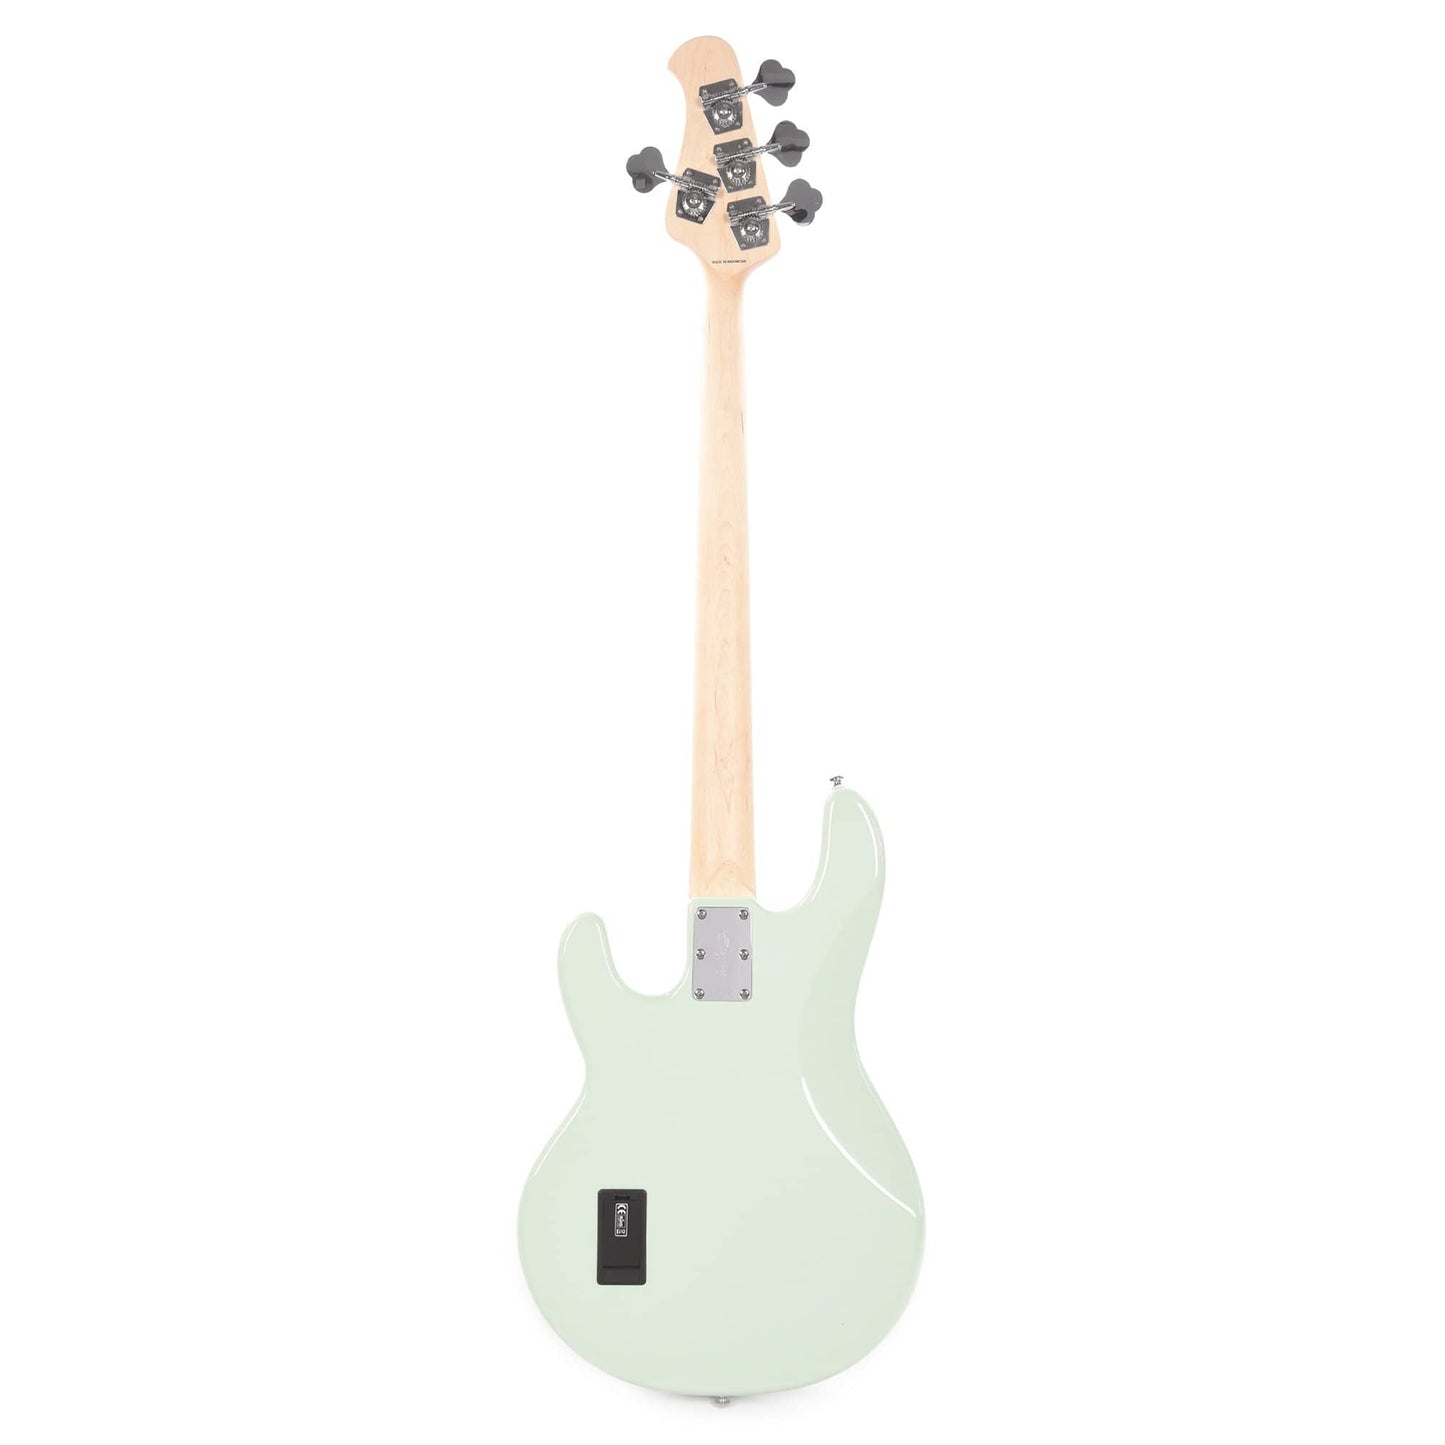 Sterling by Music Man S.U.B. Series StingRay Mint Green Electric Guitars / Solid Body